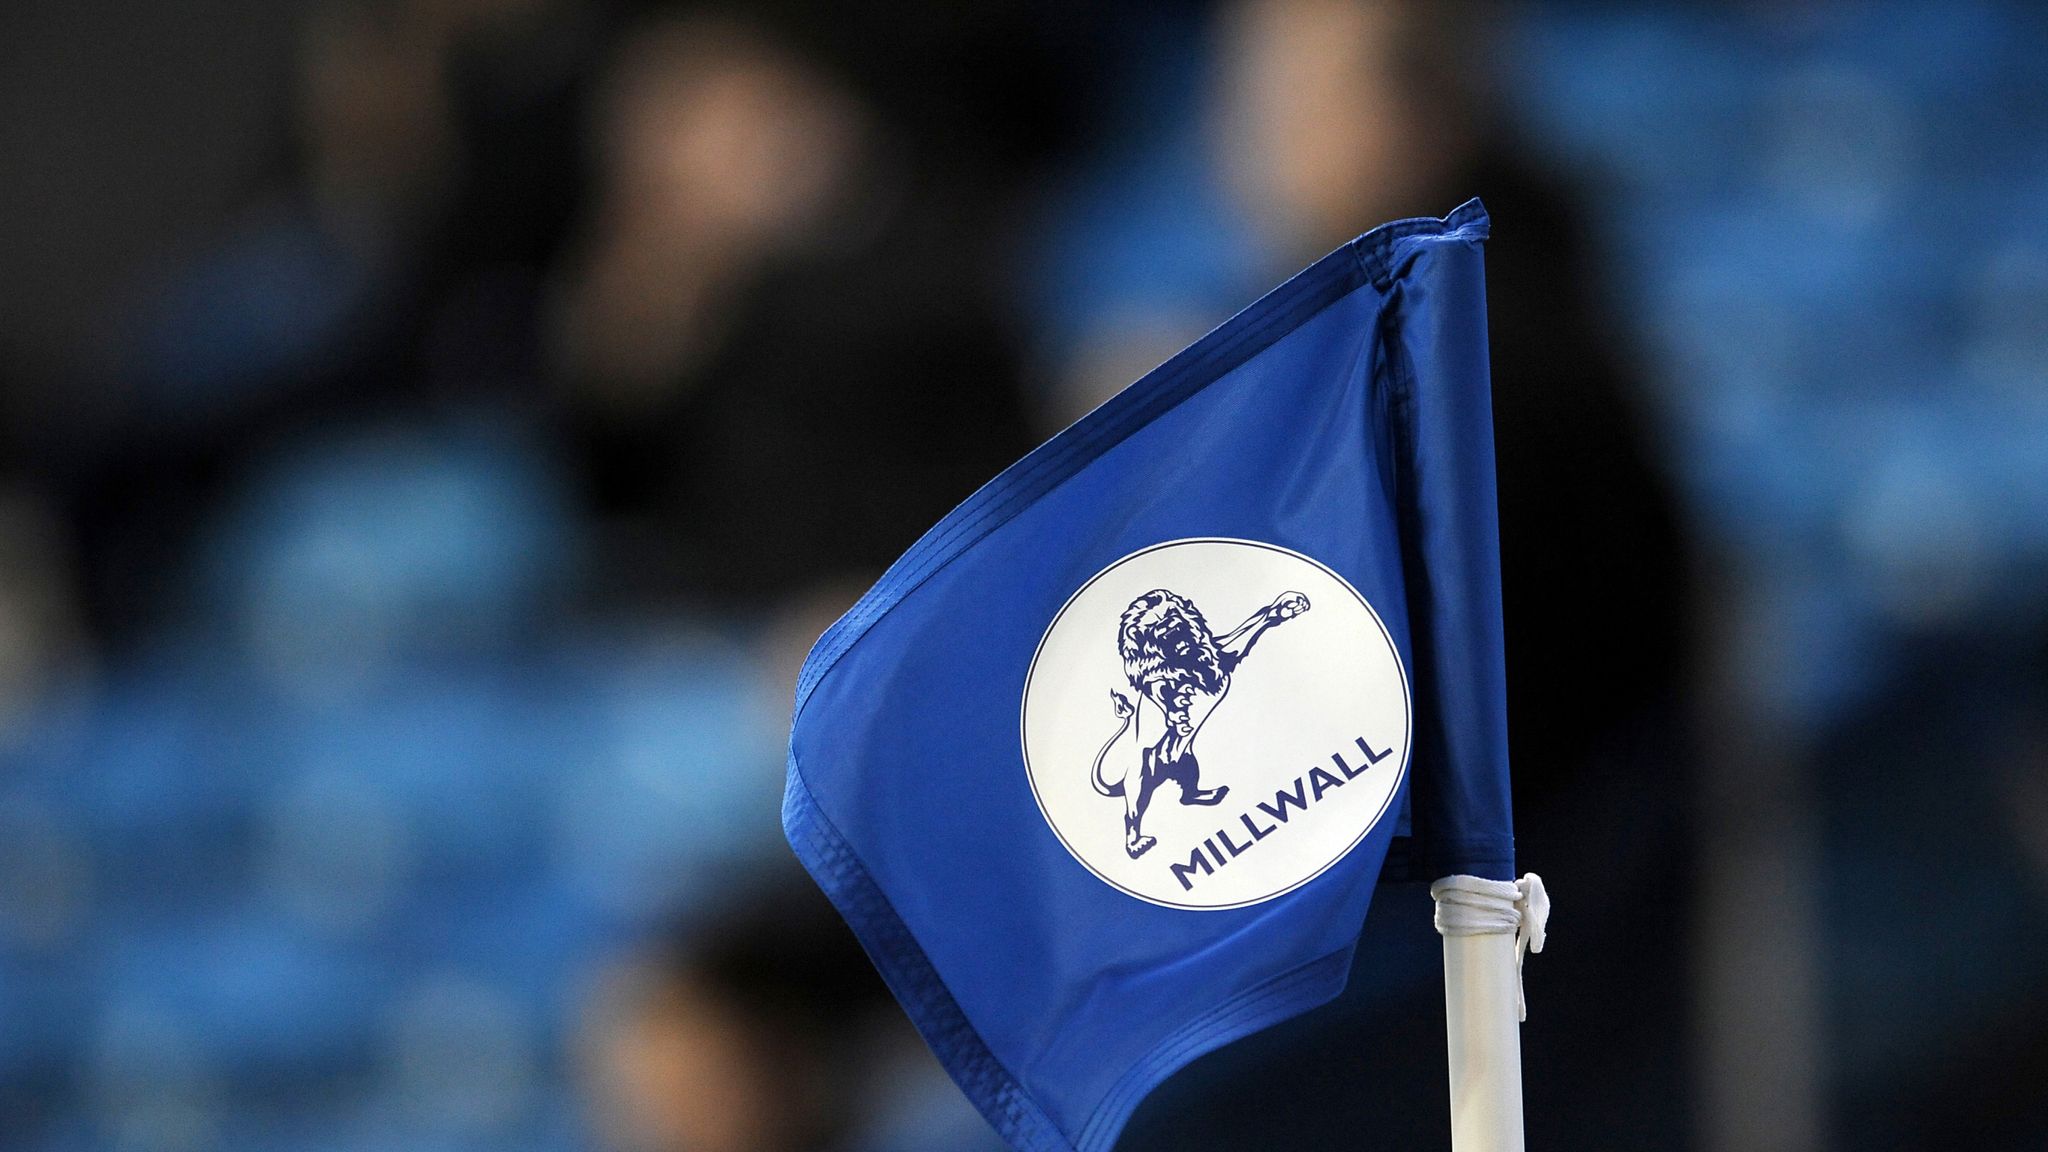 FA investigates claims Millwall fans used racist language in song